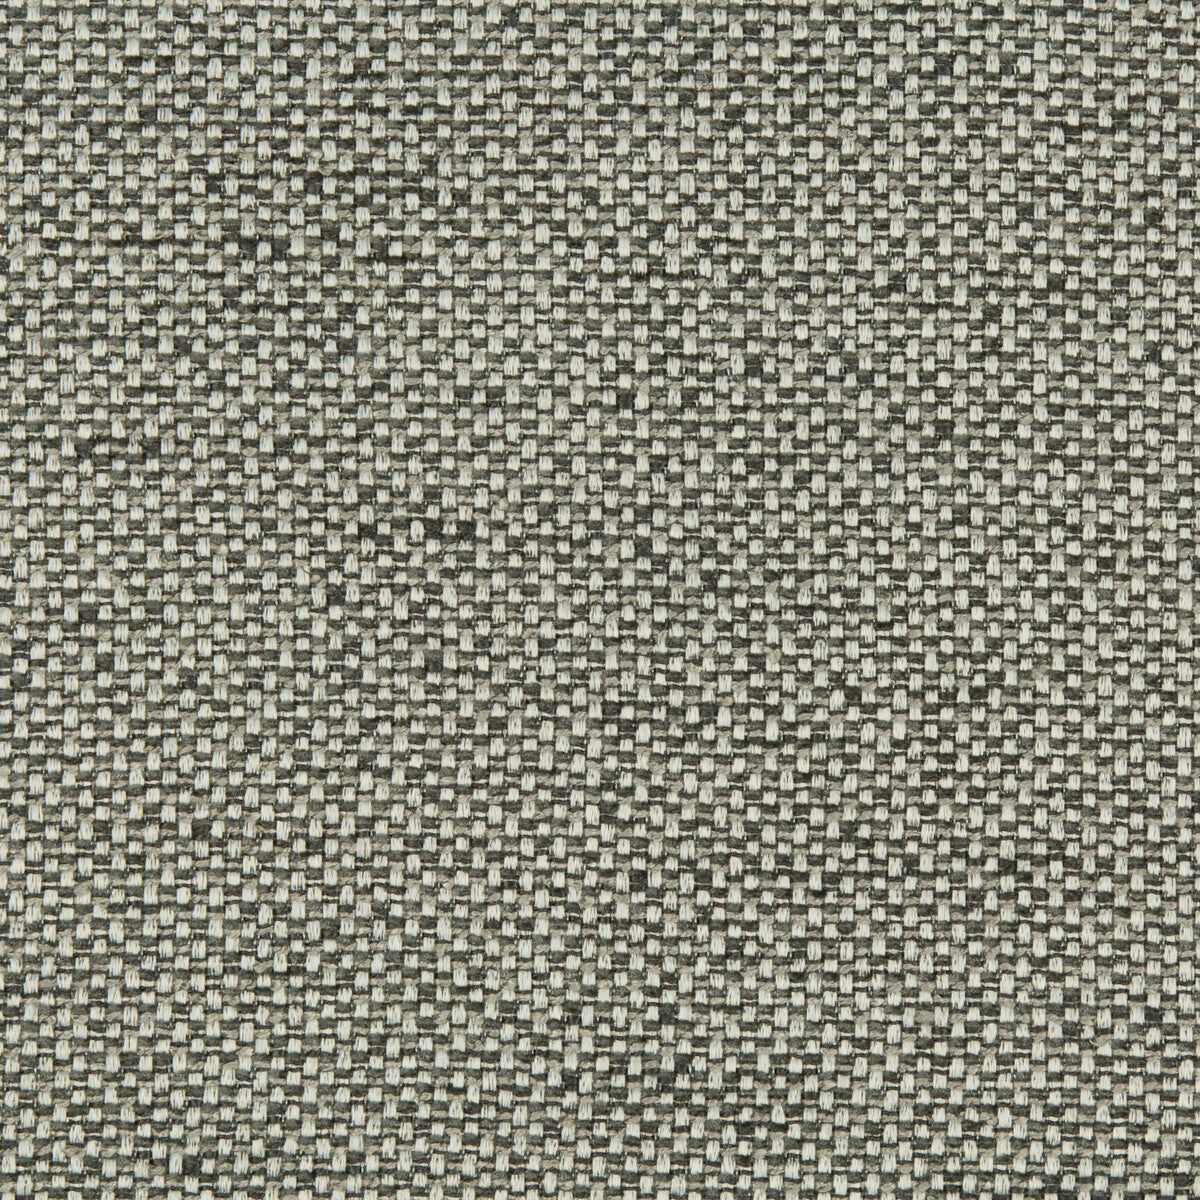 Kravet Design fabric in 34976-21 color - pattern 34976.21.0 - by Kravet Design in the Performance Crypton Home collection